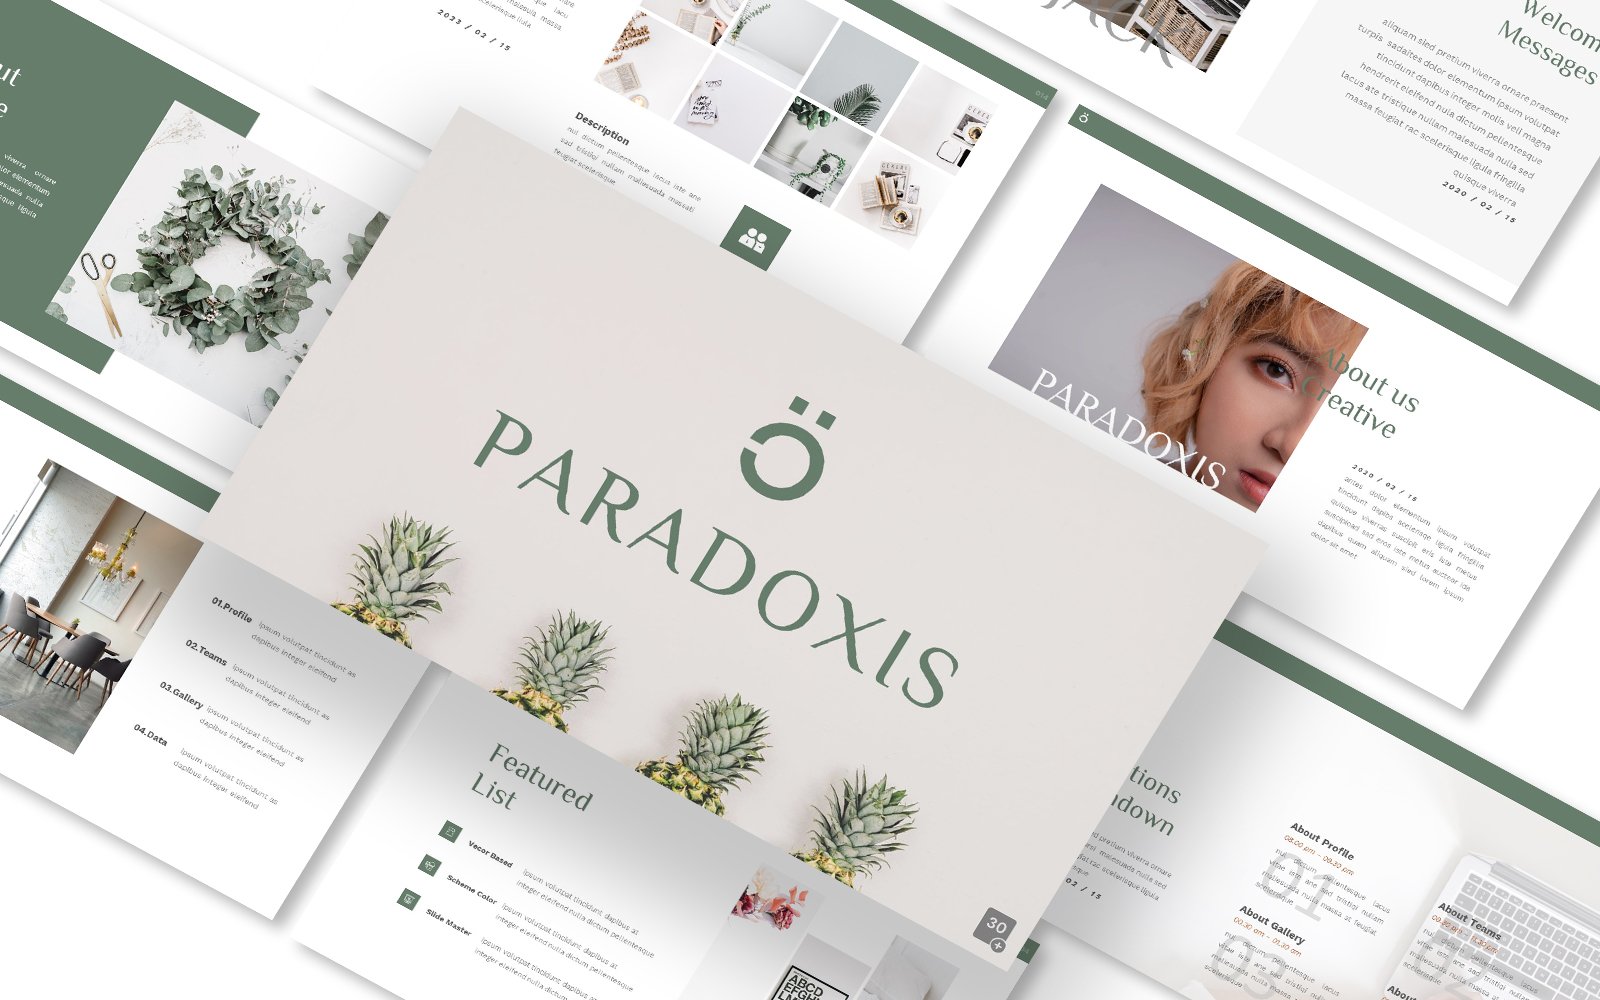 Paradoxis Company Powerpoint Template